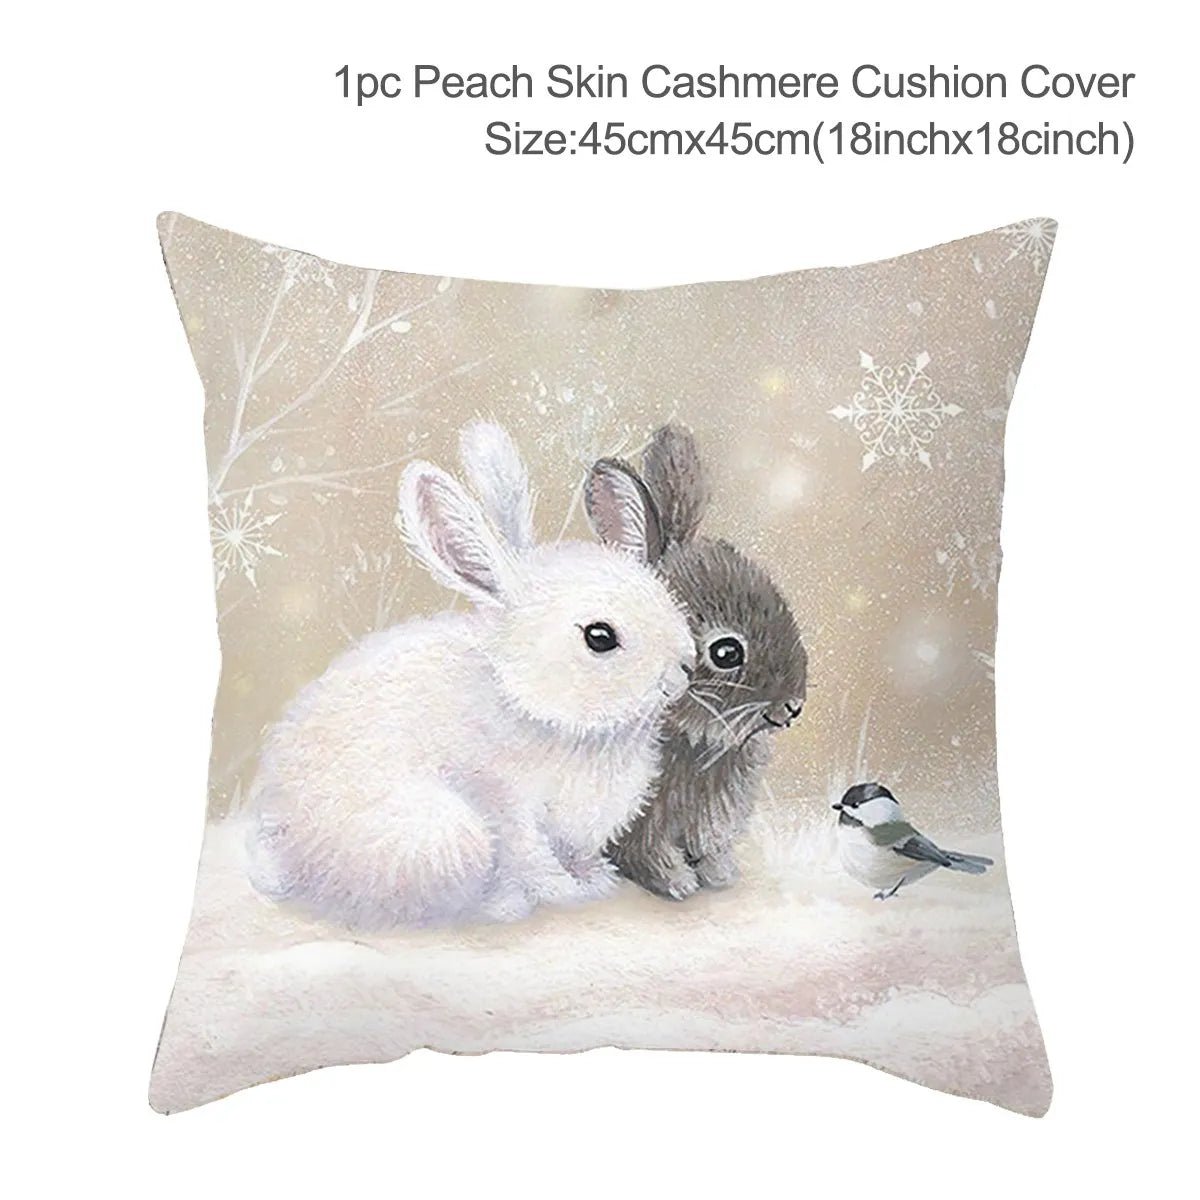 Christmas Cushion Cover - Sweet Sentimental GiftsChristmas Cushion CoverPillowsStaraiseSweet Sentimental Gifts91371532-38-as-pictureChristmas Cushion Coveras picture38208447418635